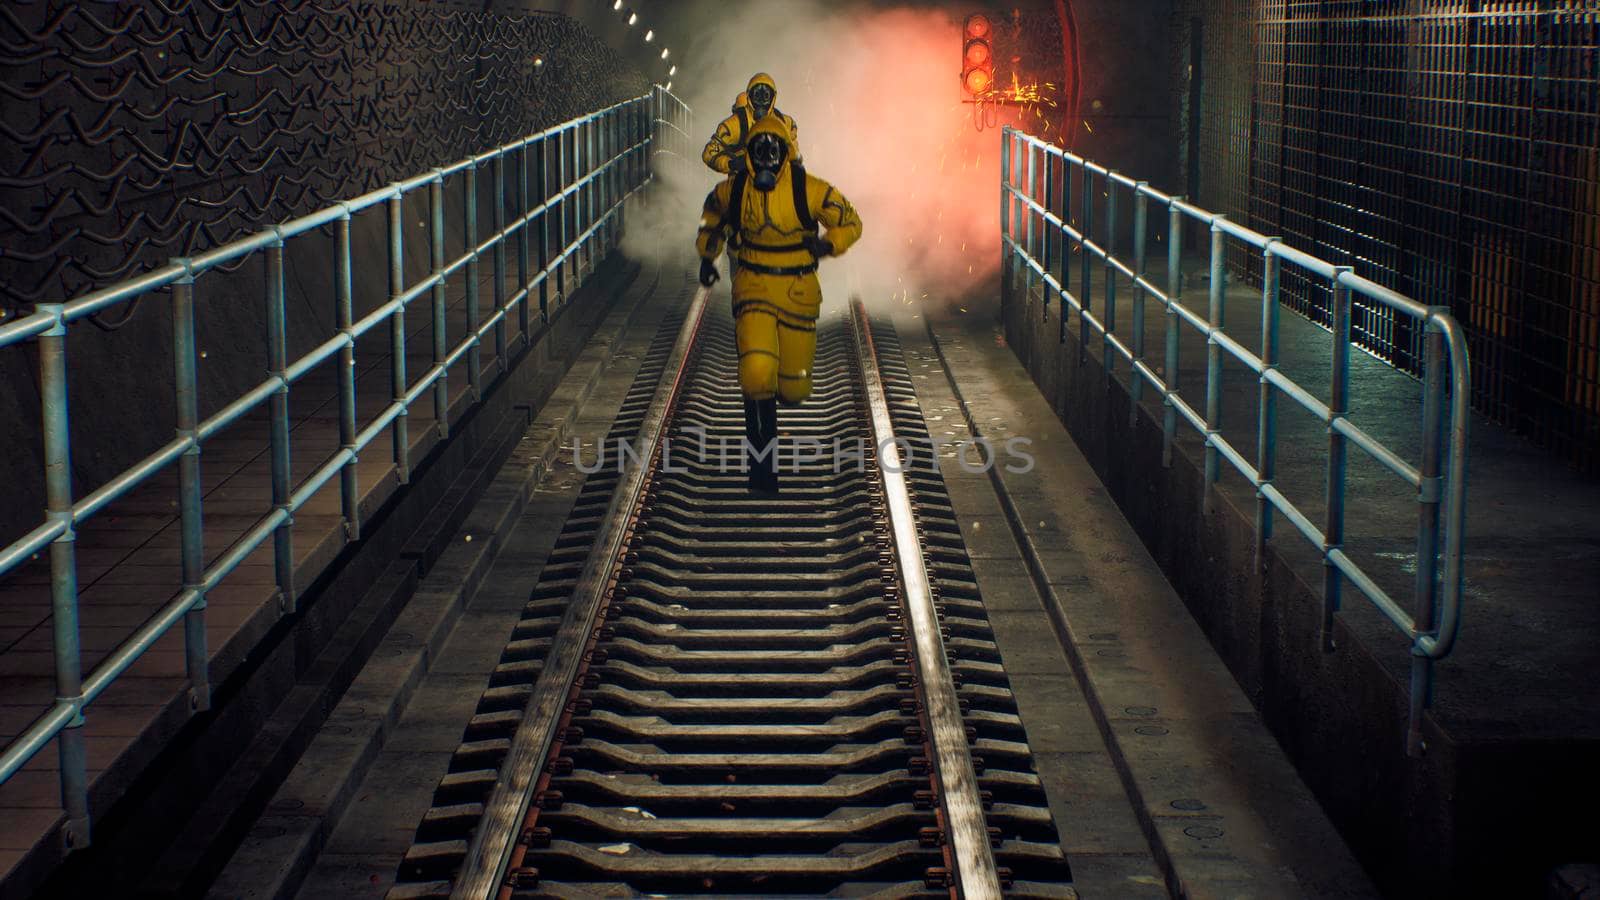 People in chemical protective clothing run out of the tunnel to go to fight the epidemic. The concept of a post-apocalyptic world after a global pandemic.